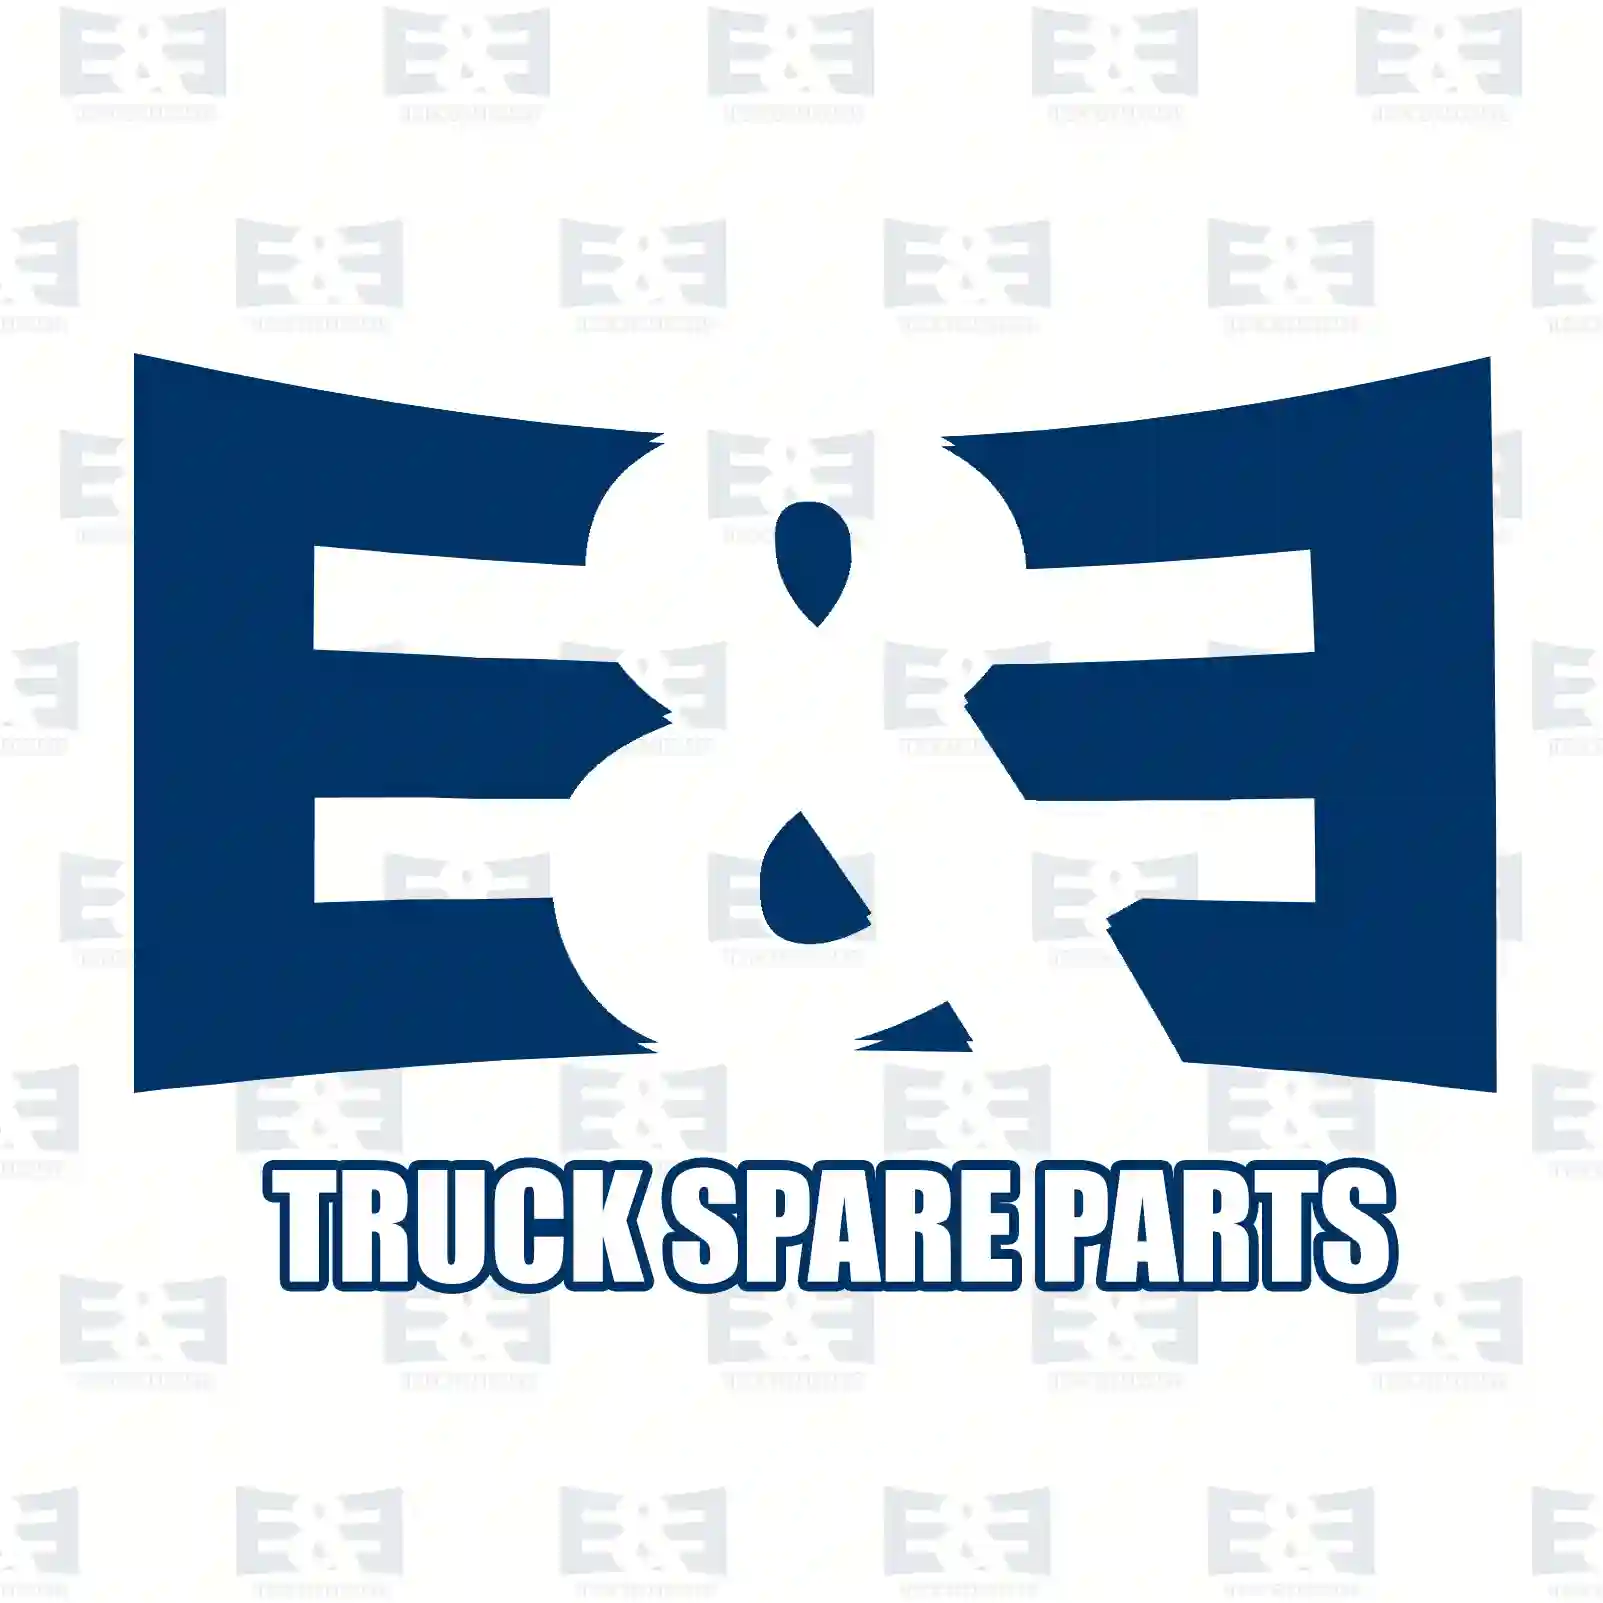 Mounting kit, exhaust manifold, 2E2208522, 4479906004S2, ||  2E2208522 E&E Truck Spare Parts | Truck Spare Parts, Auotomotive Spare Parts Mounting kit, exhaust manifold, 2E2208522, 4479906004S2, ||  2E2208522 E&E Truck Spare Parts | Truck Spare Parts, Auotomotive Spare Parts